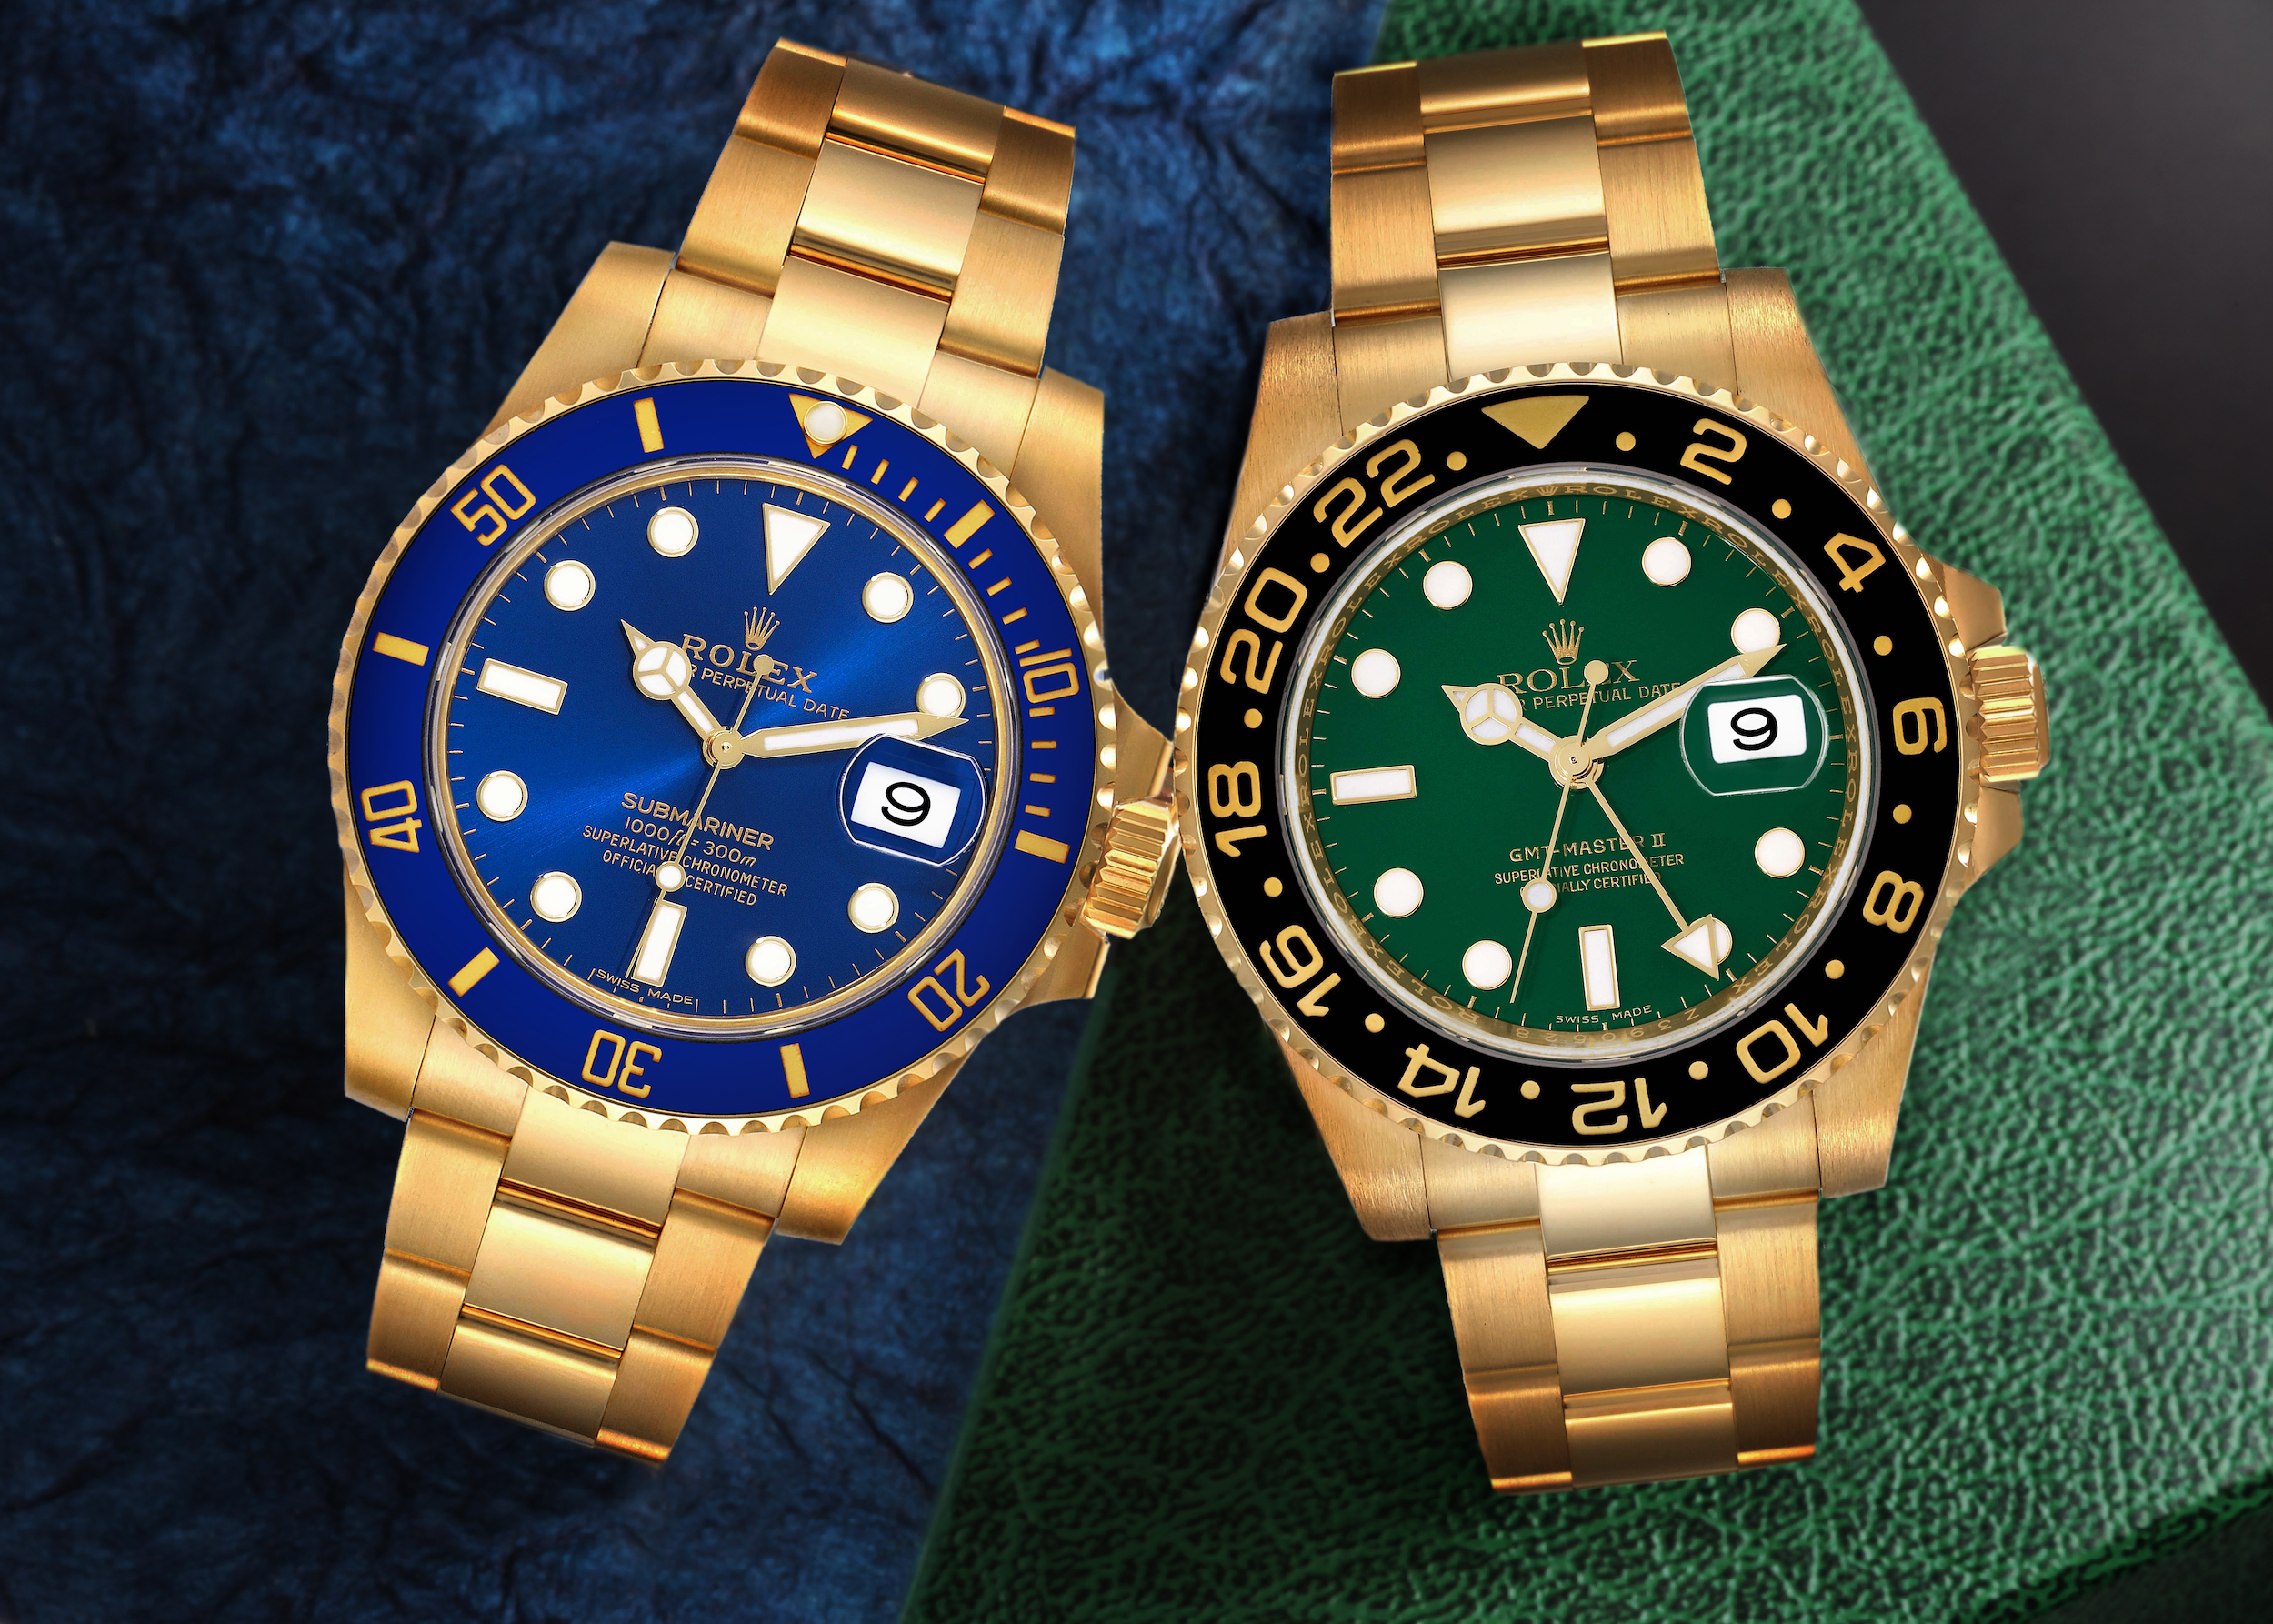 Submariner Green Dial  Luxury watches for men, Rolex watches for men, Rolex  watches